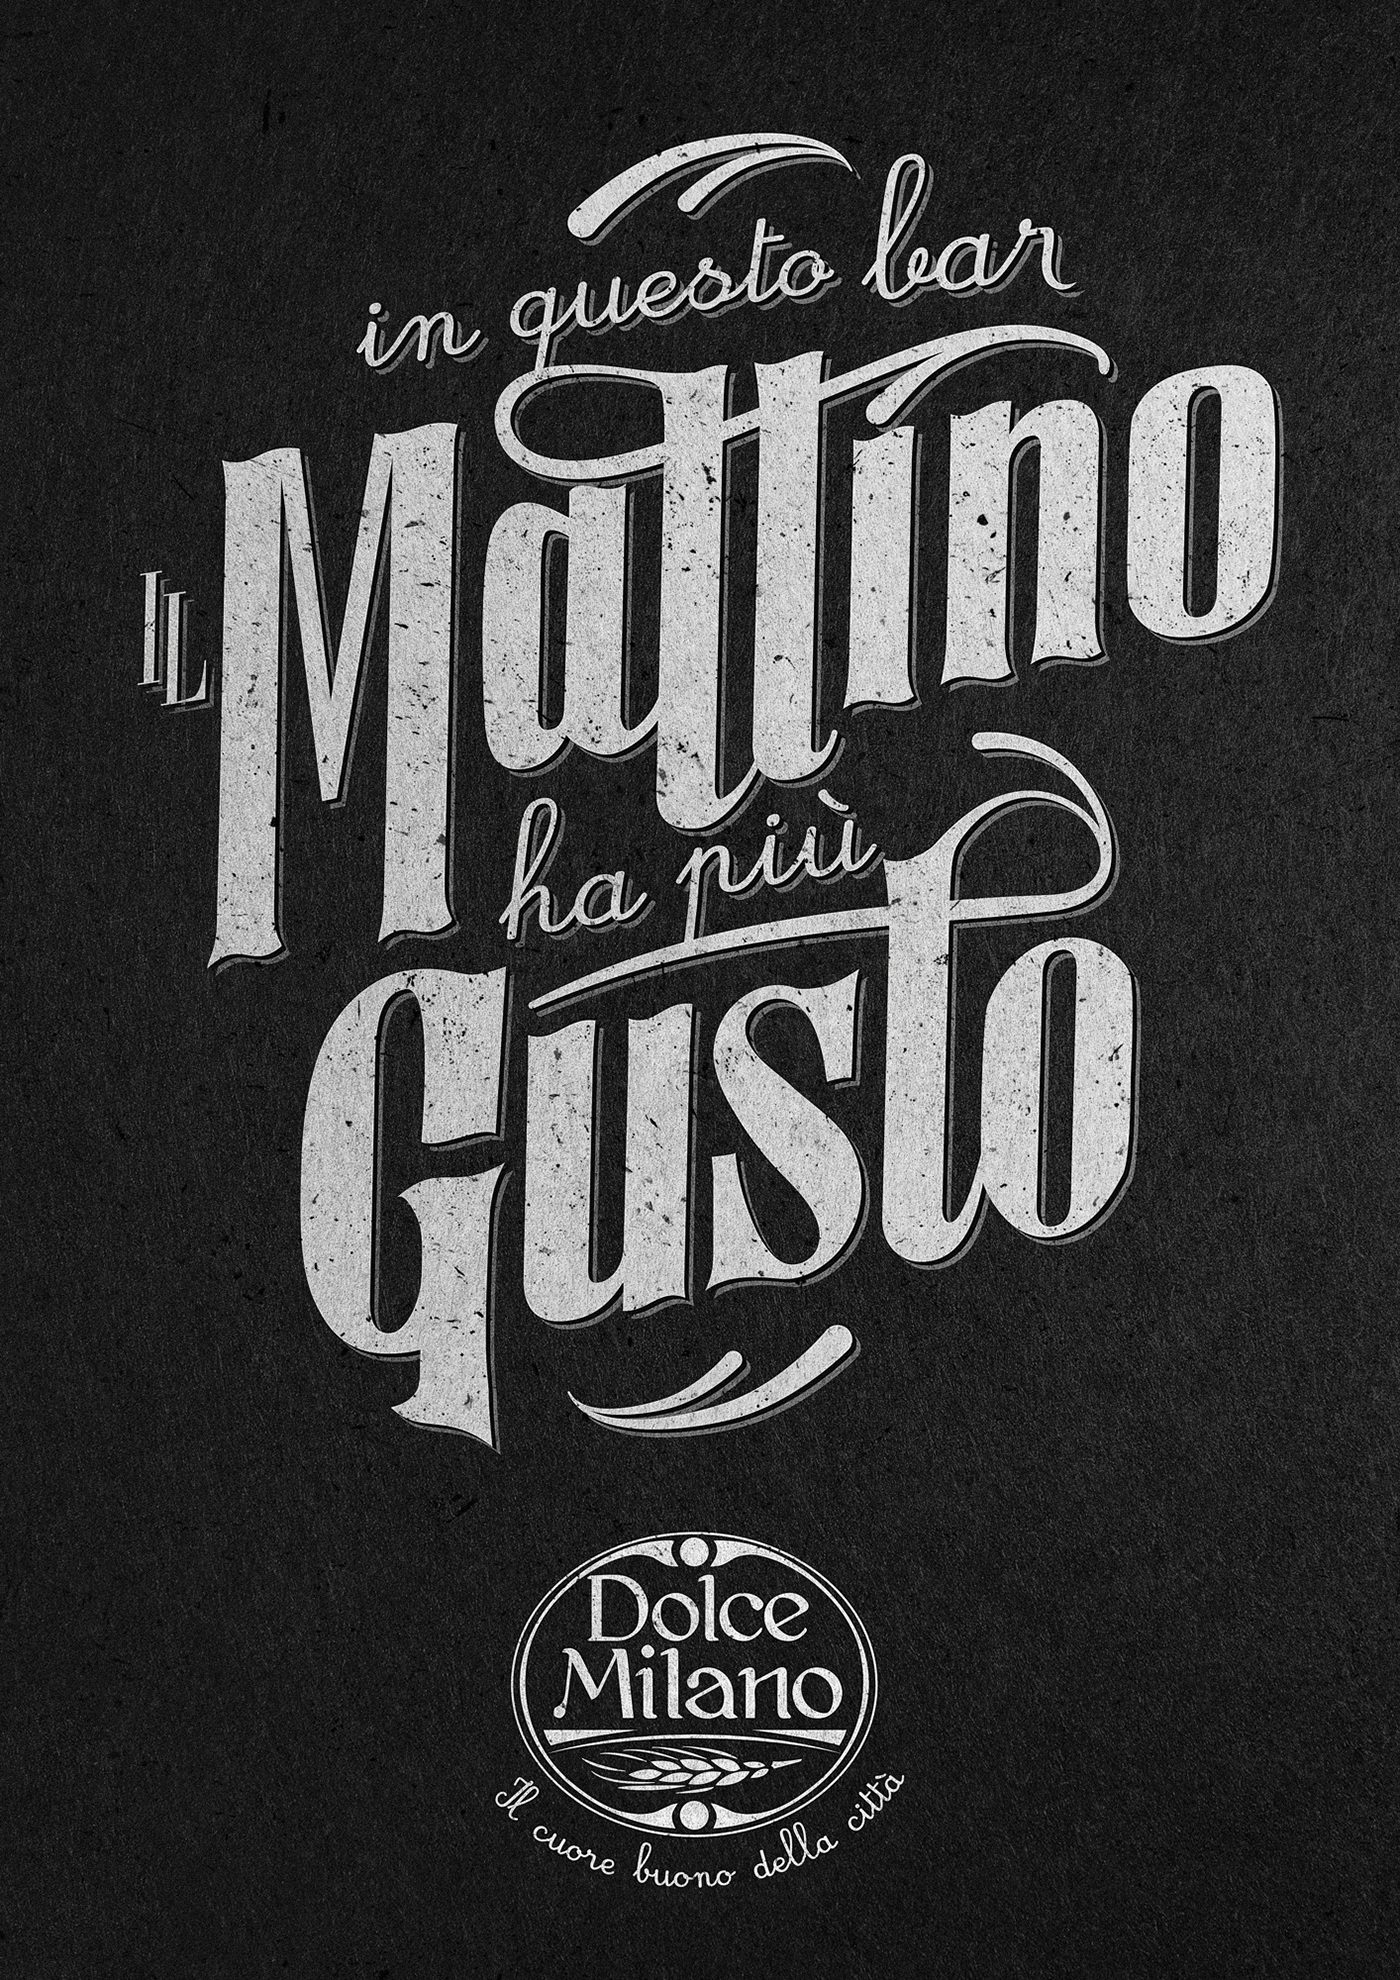 typography   dolce milano poster graphic studiovais Patisserie breakfast bakery